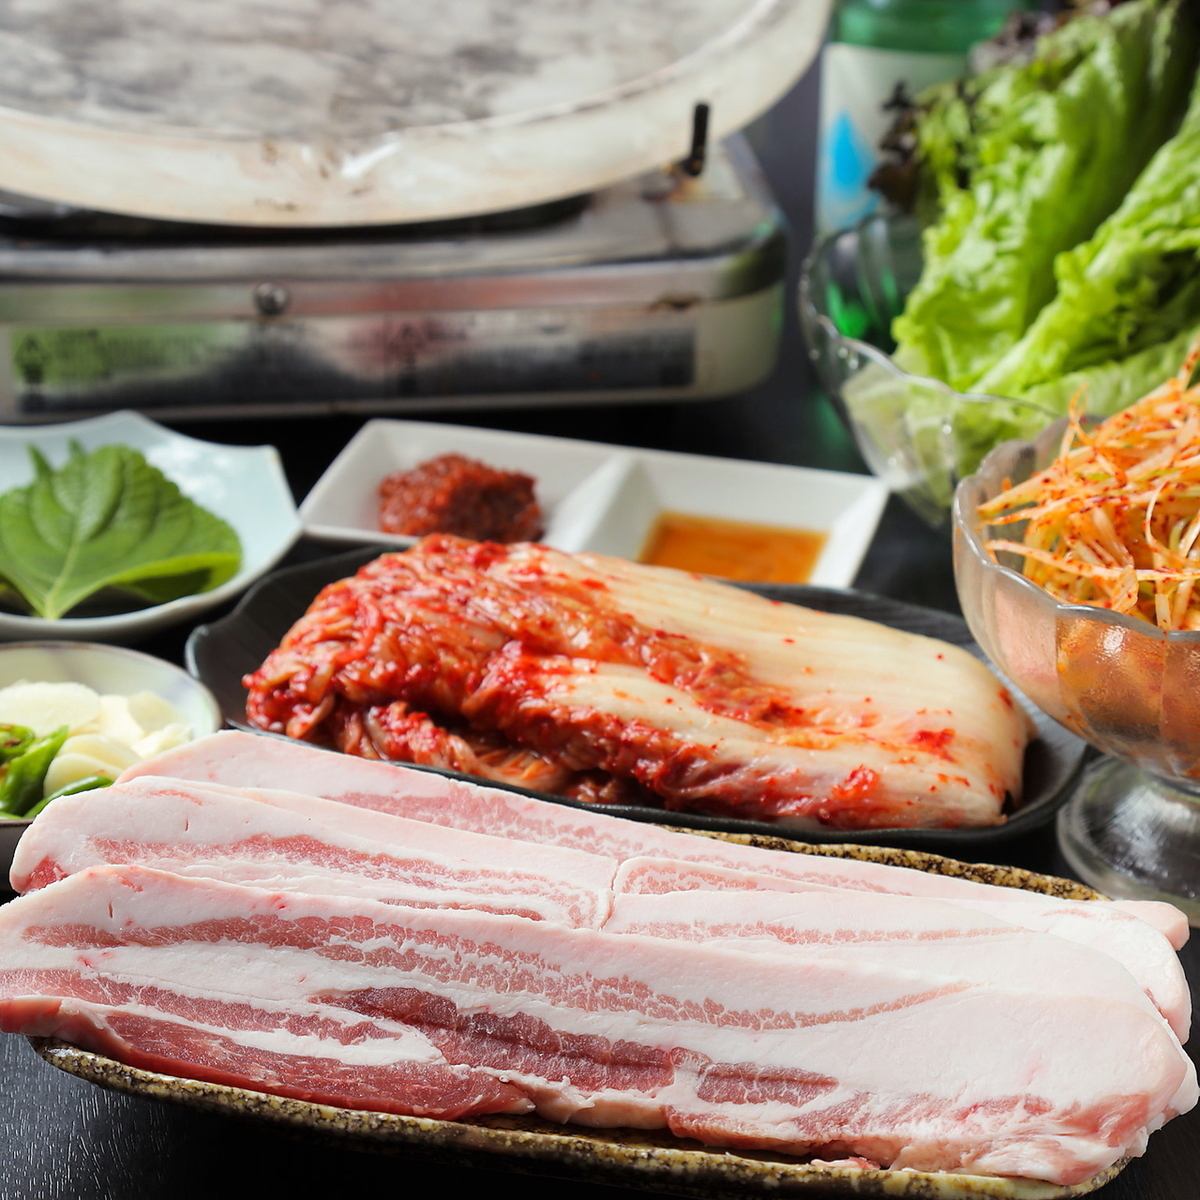 All-you-can-eat samgyeopsal is also available ◎ Enjoy the authentic taste!